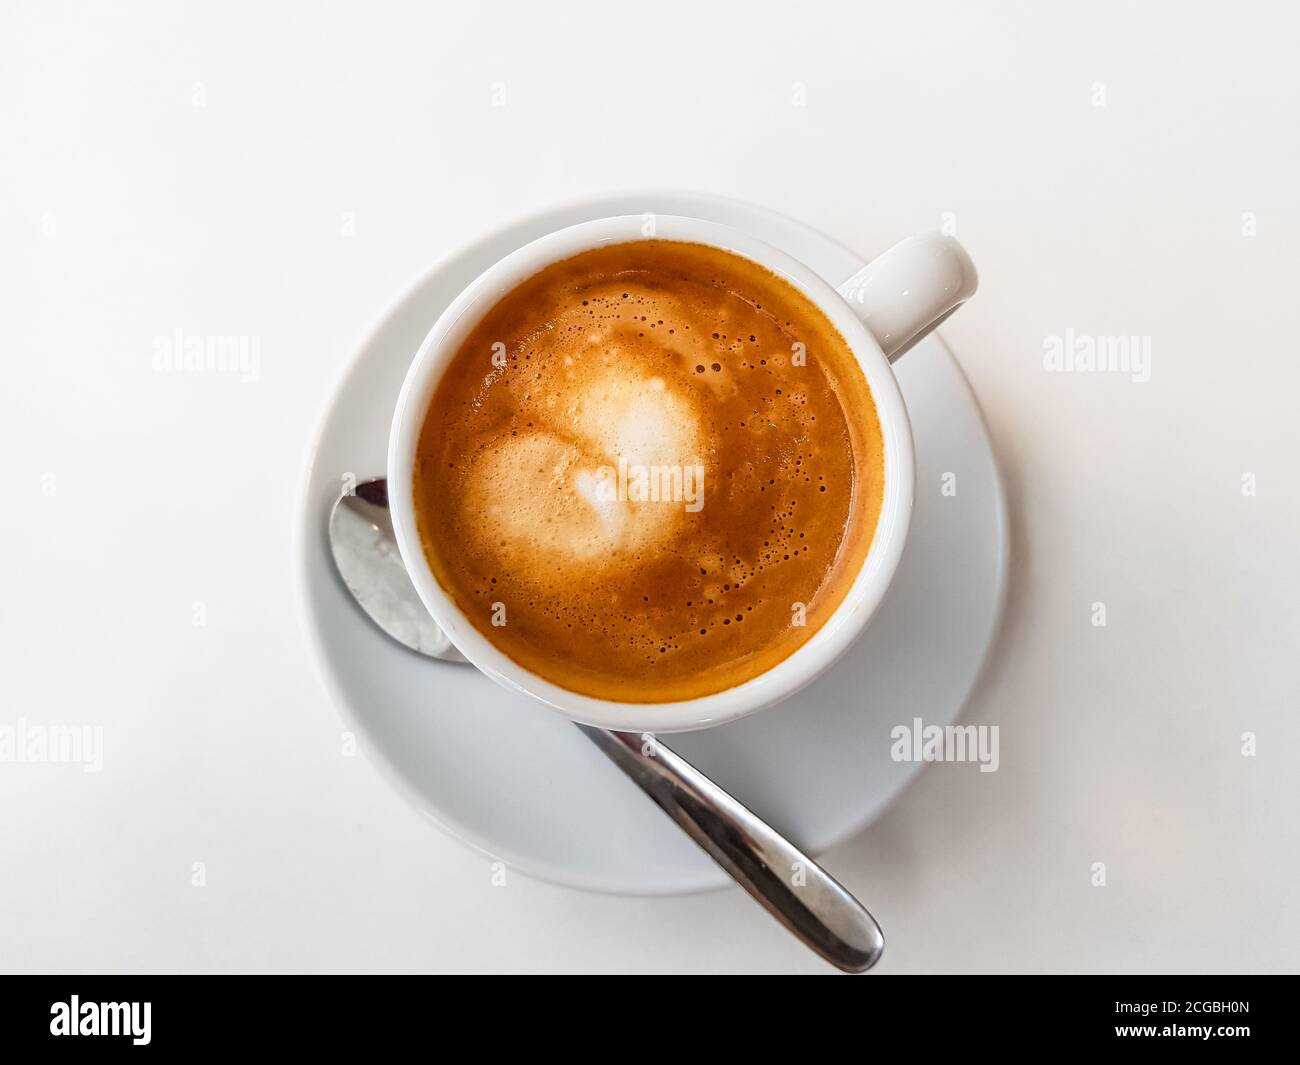 Cortado-Spanish coffee with milk in a small Cup. Stock Photo